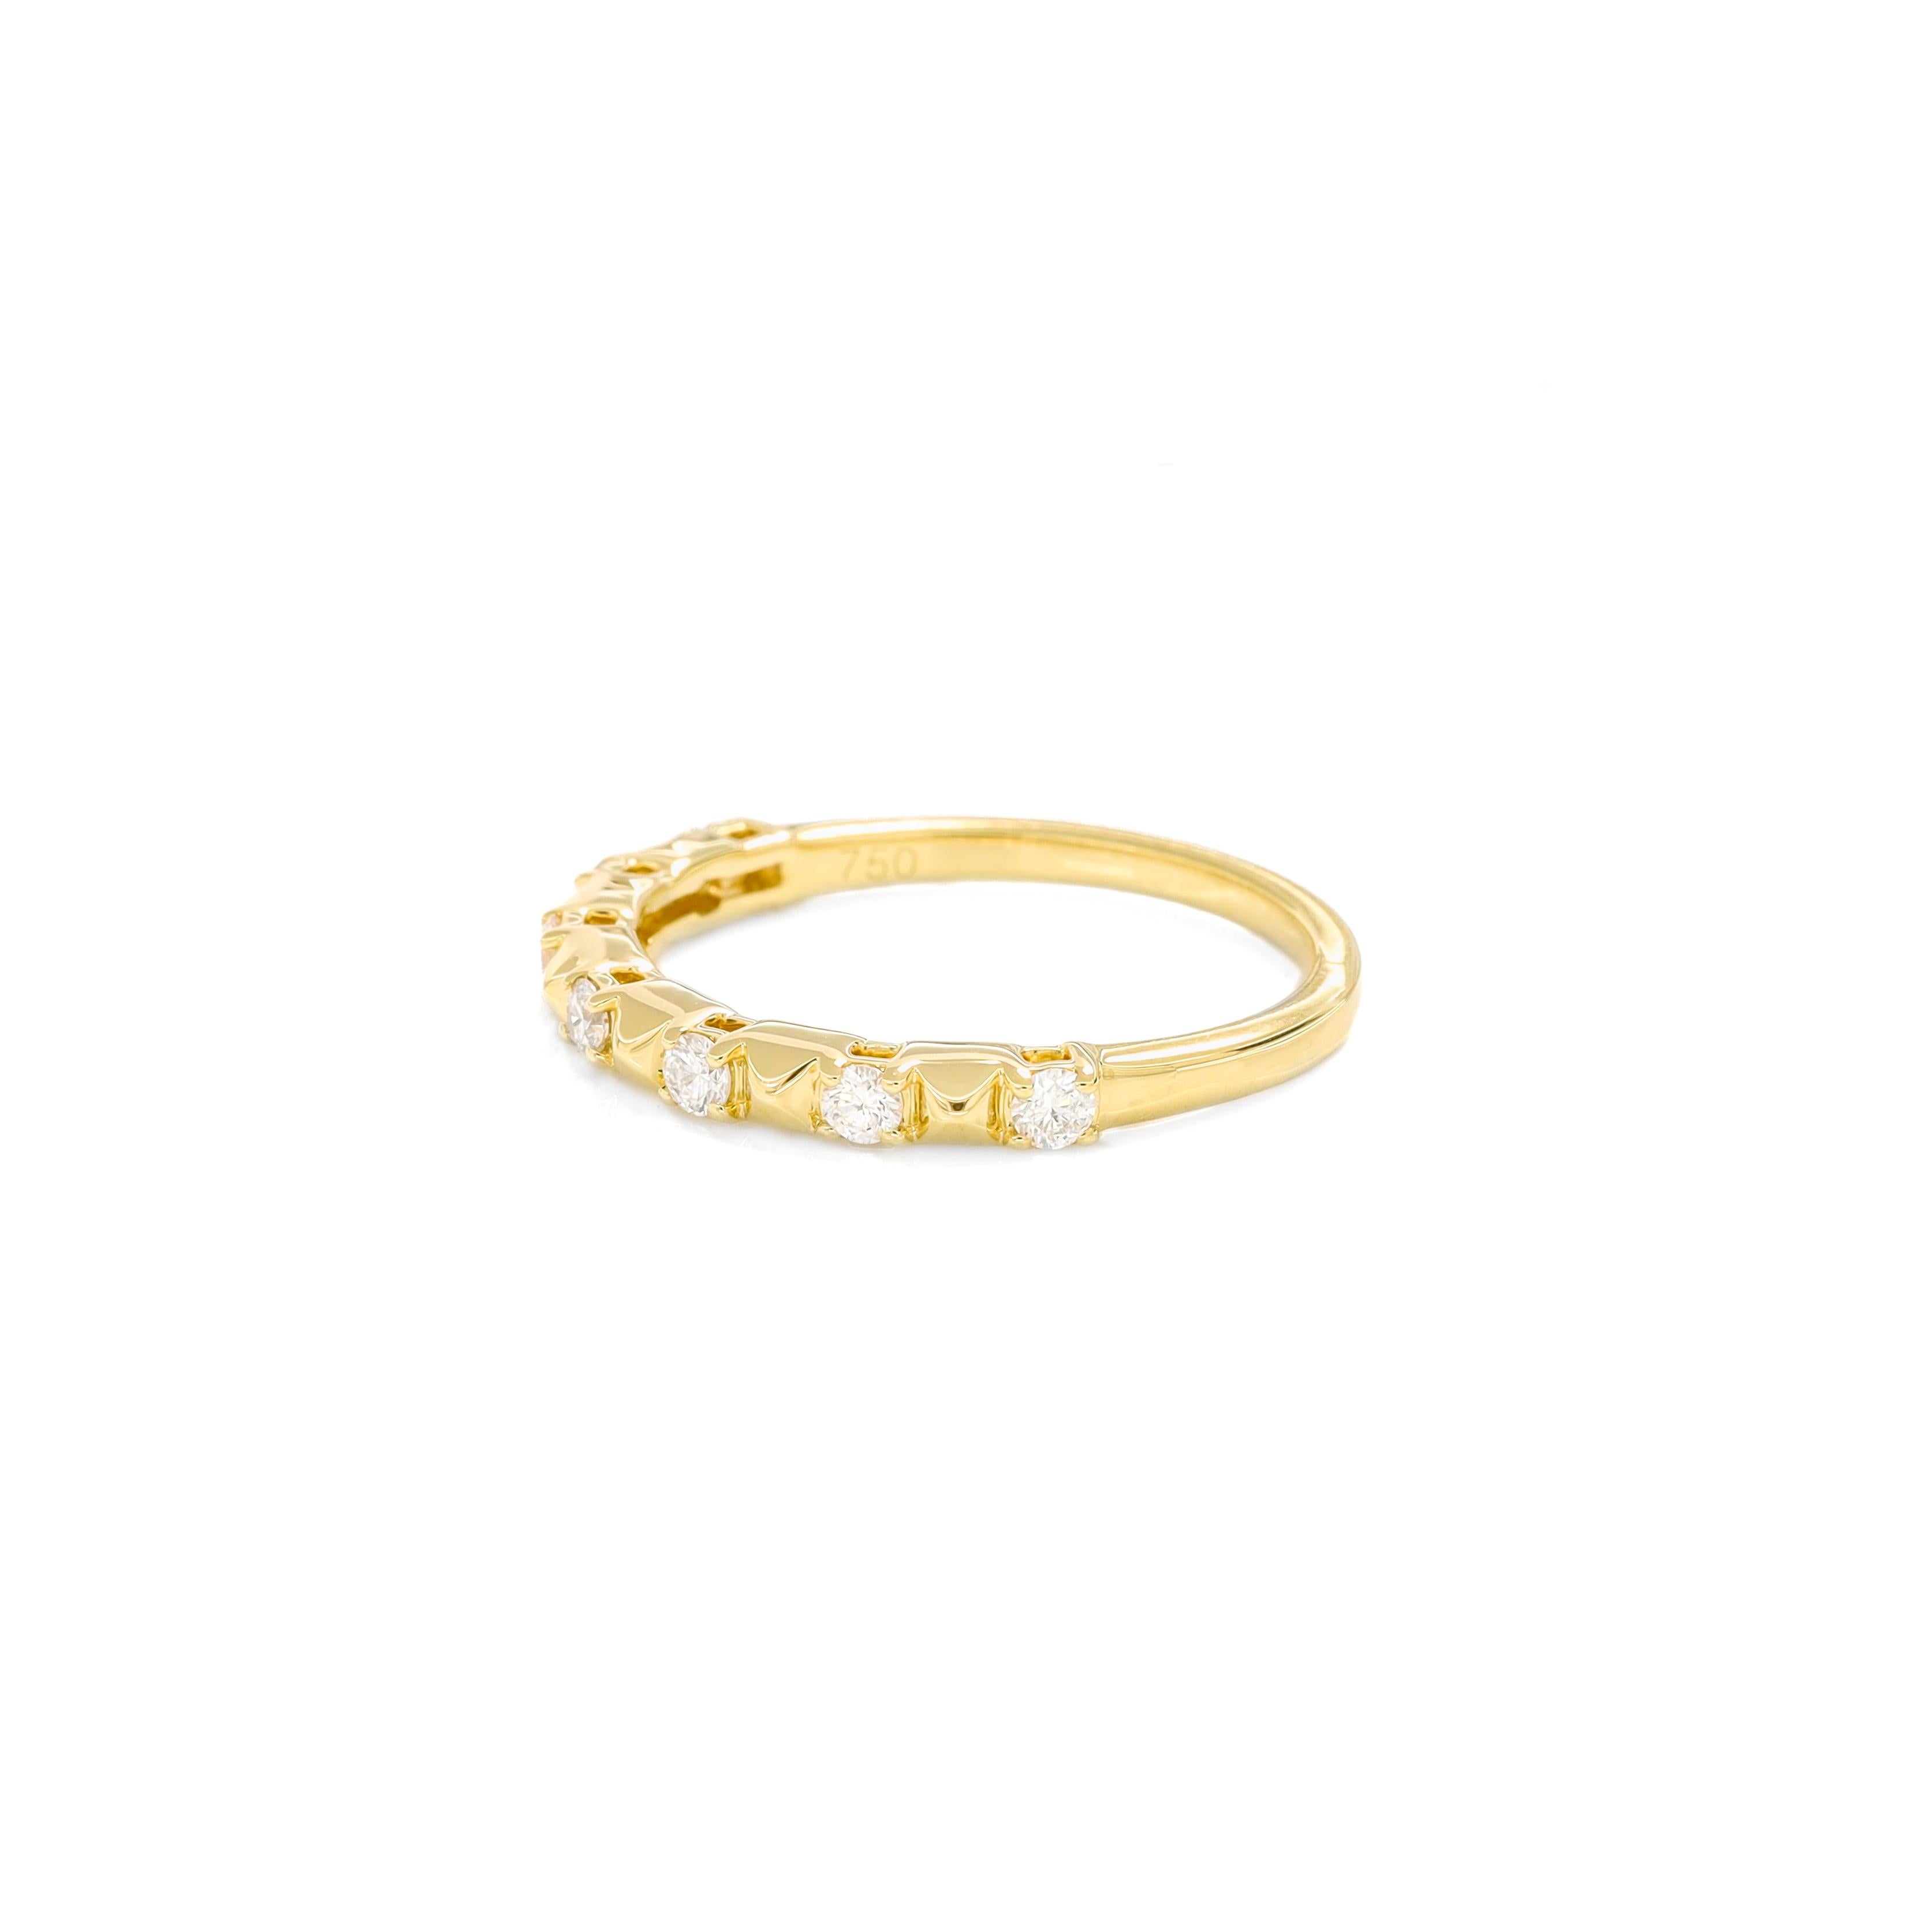 At the heart of the ring lies a row of round diamonds totaling 0.25 carats, each diamond meticulously set within the rich embrace of 18KT Yellow Gold. Adding a touch of distinction to the design, textured gold beads delicately adorn the spaces